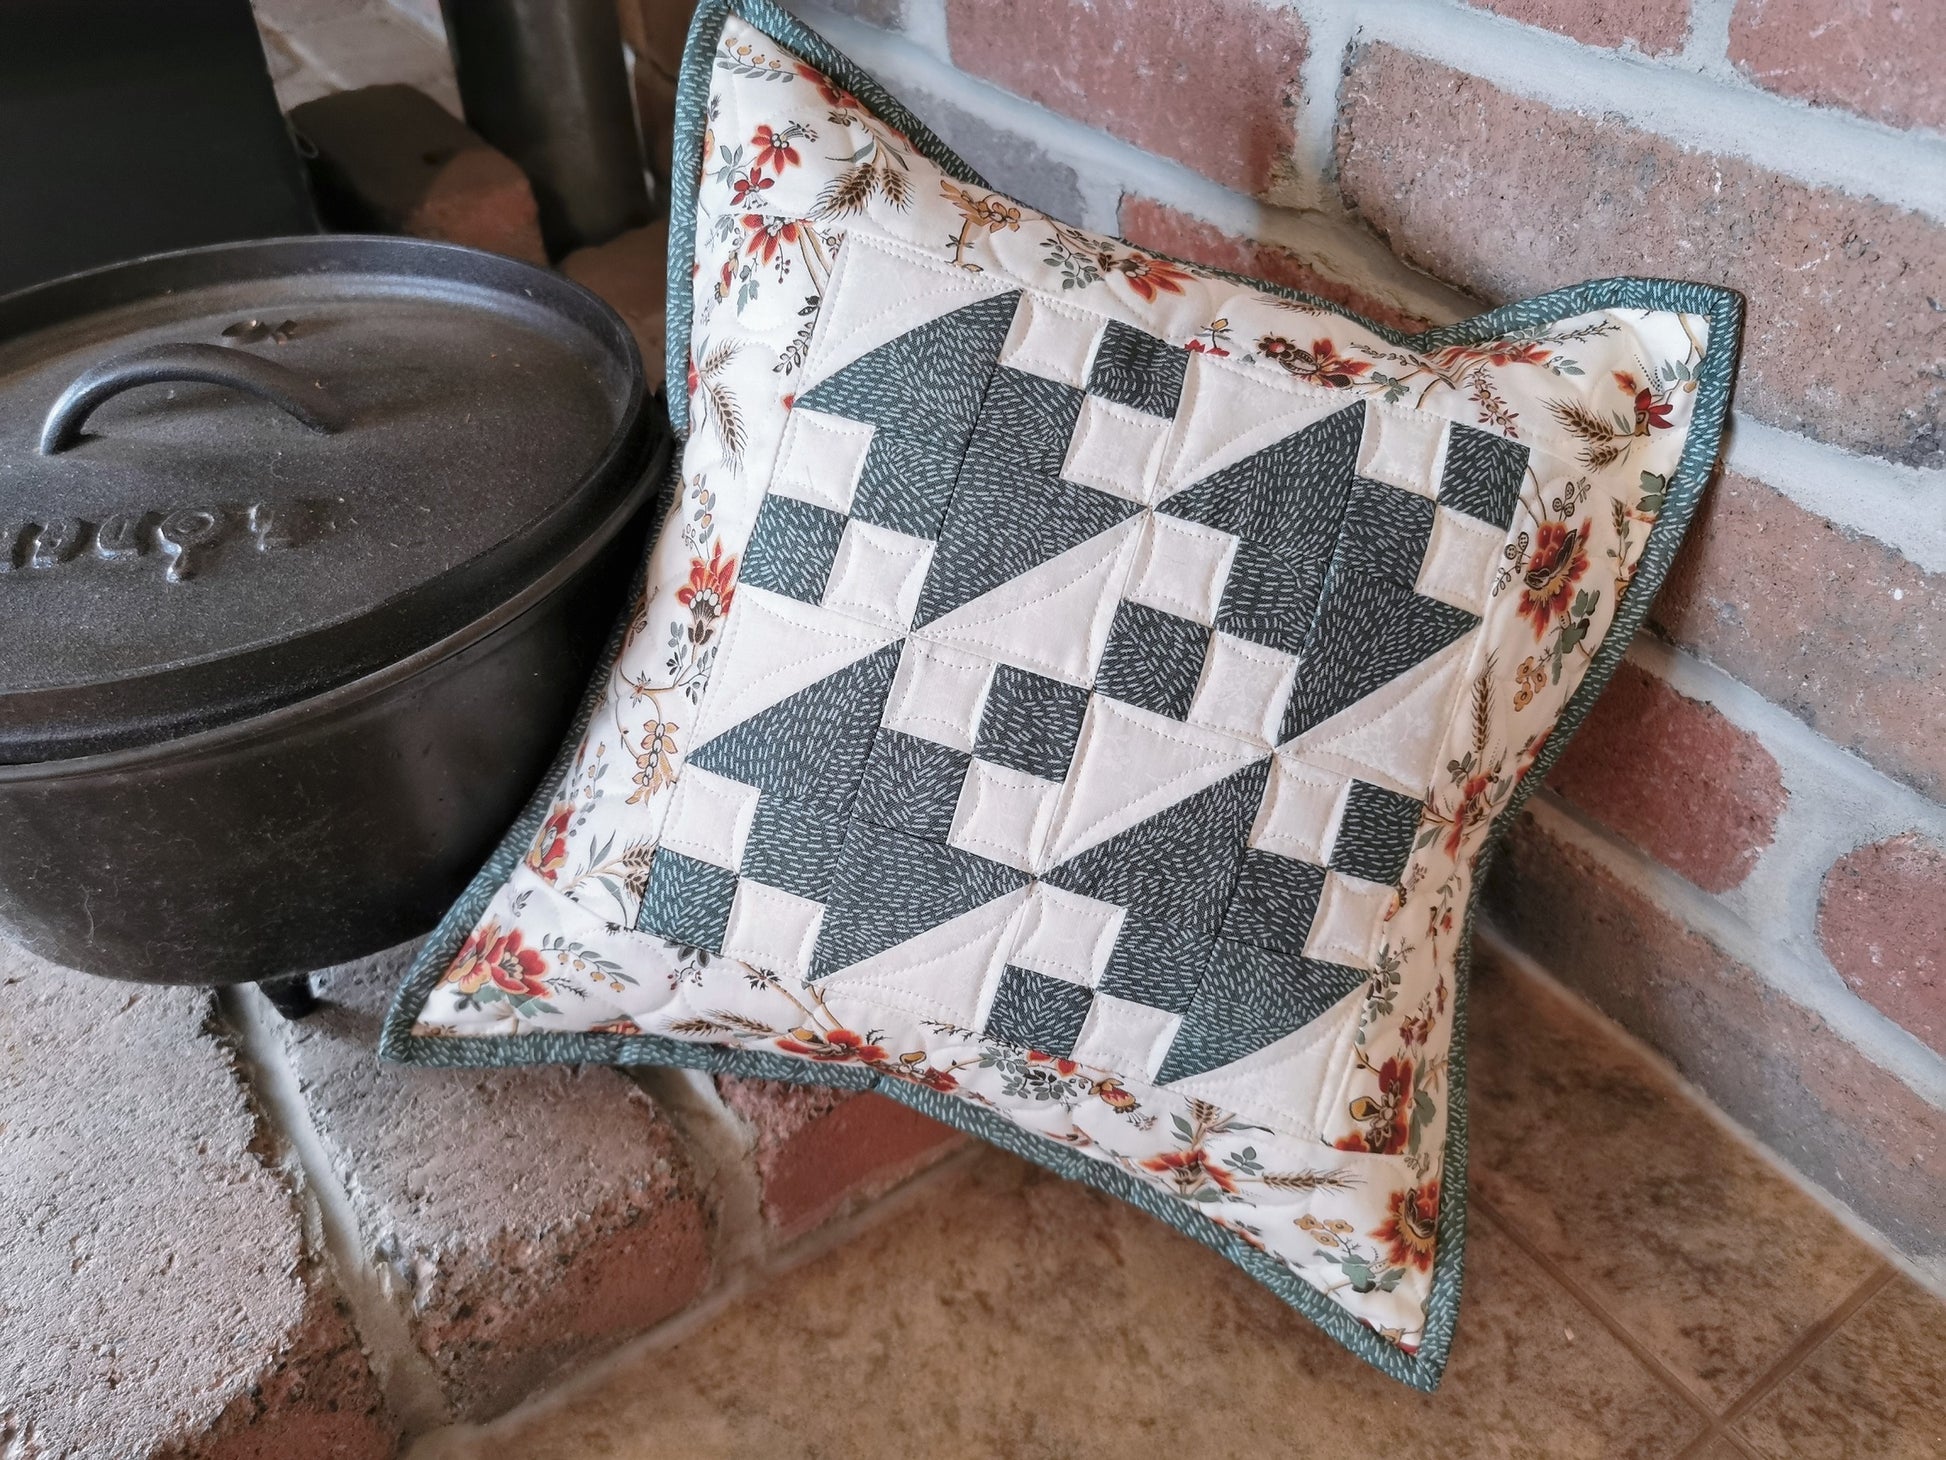 This 12 inch square throw pillow is the perfect accent. Teal and white patchwork surrounded by a coordinating floral border is light and summery.